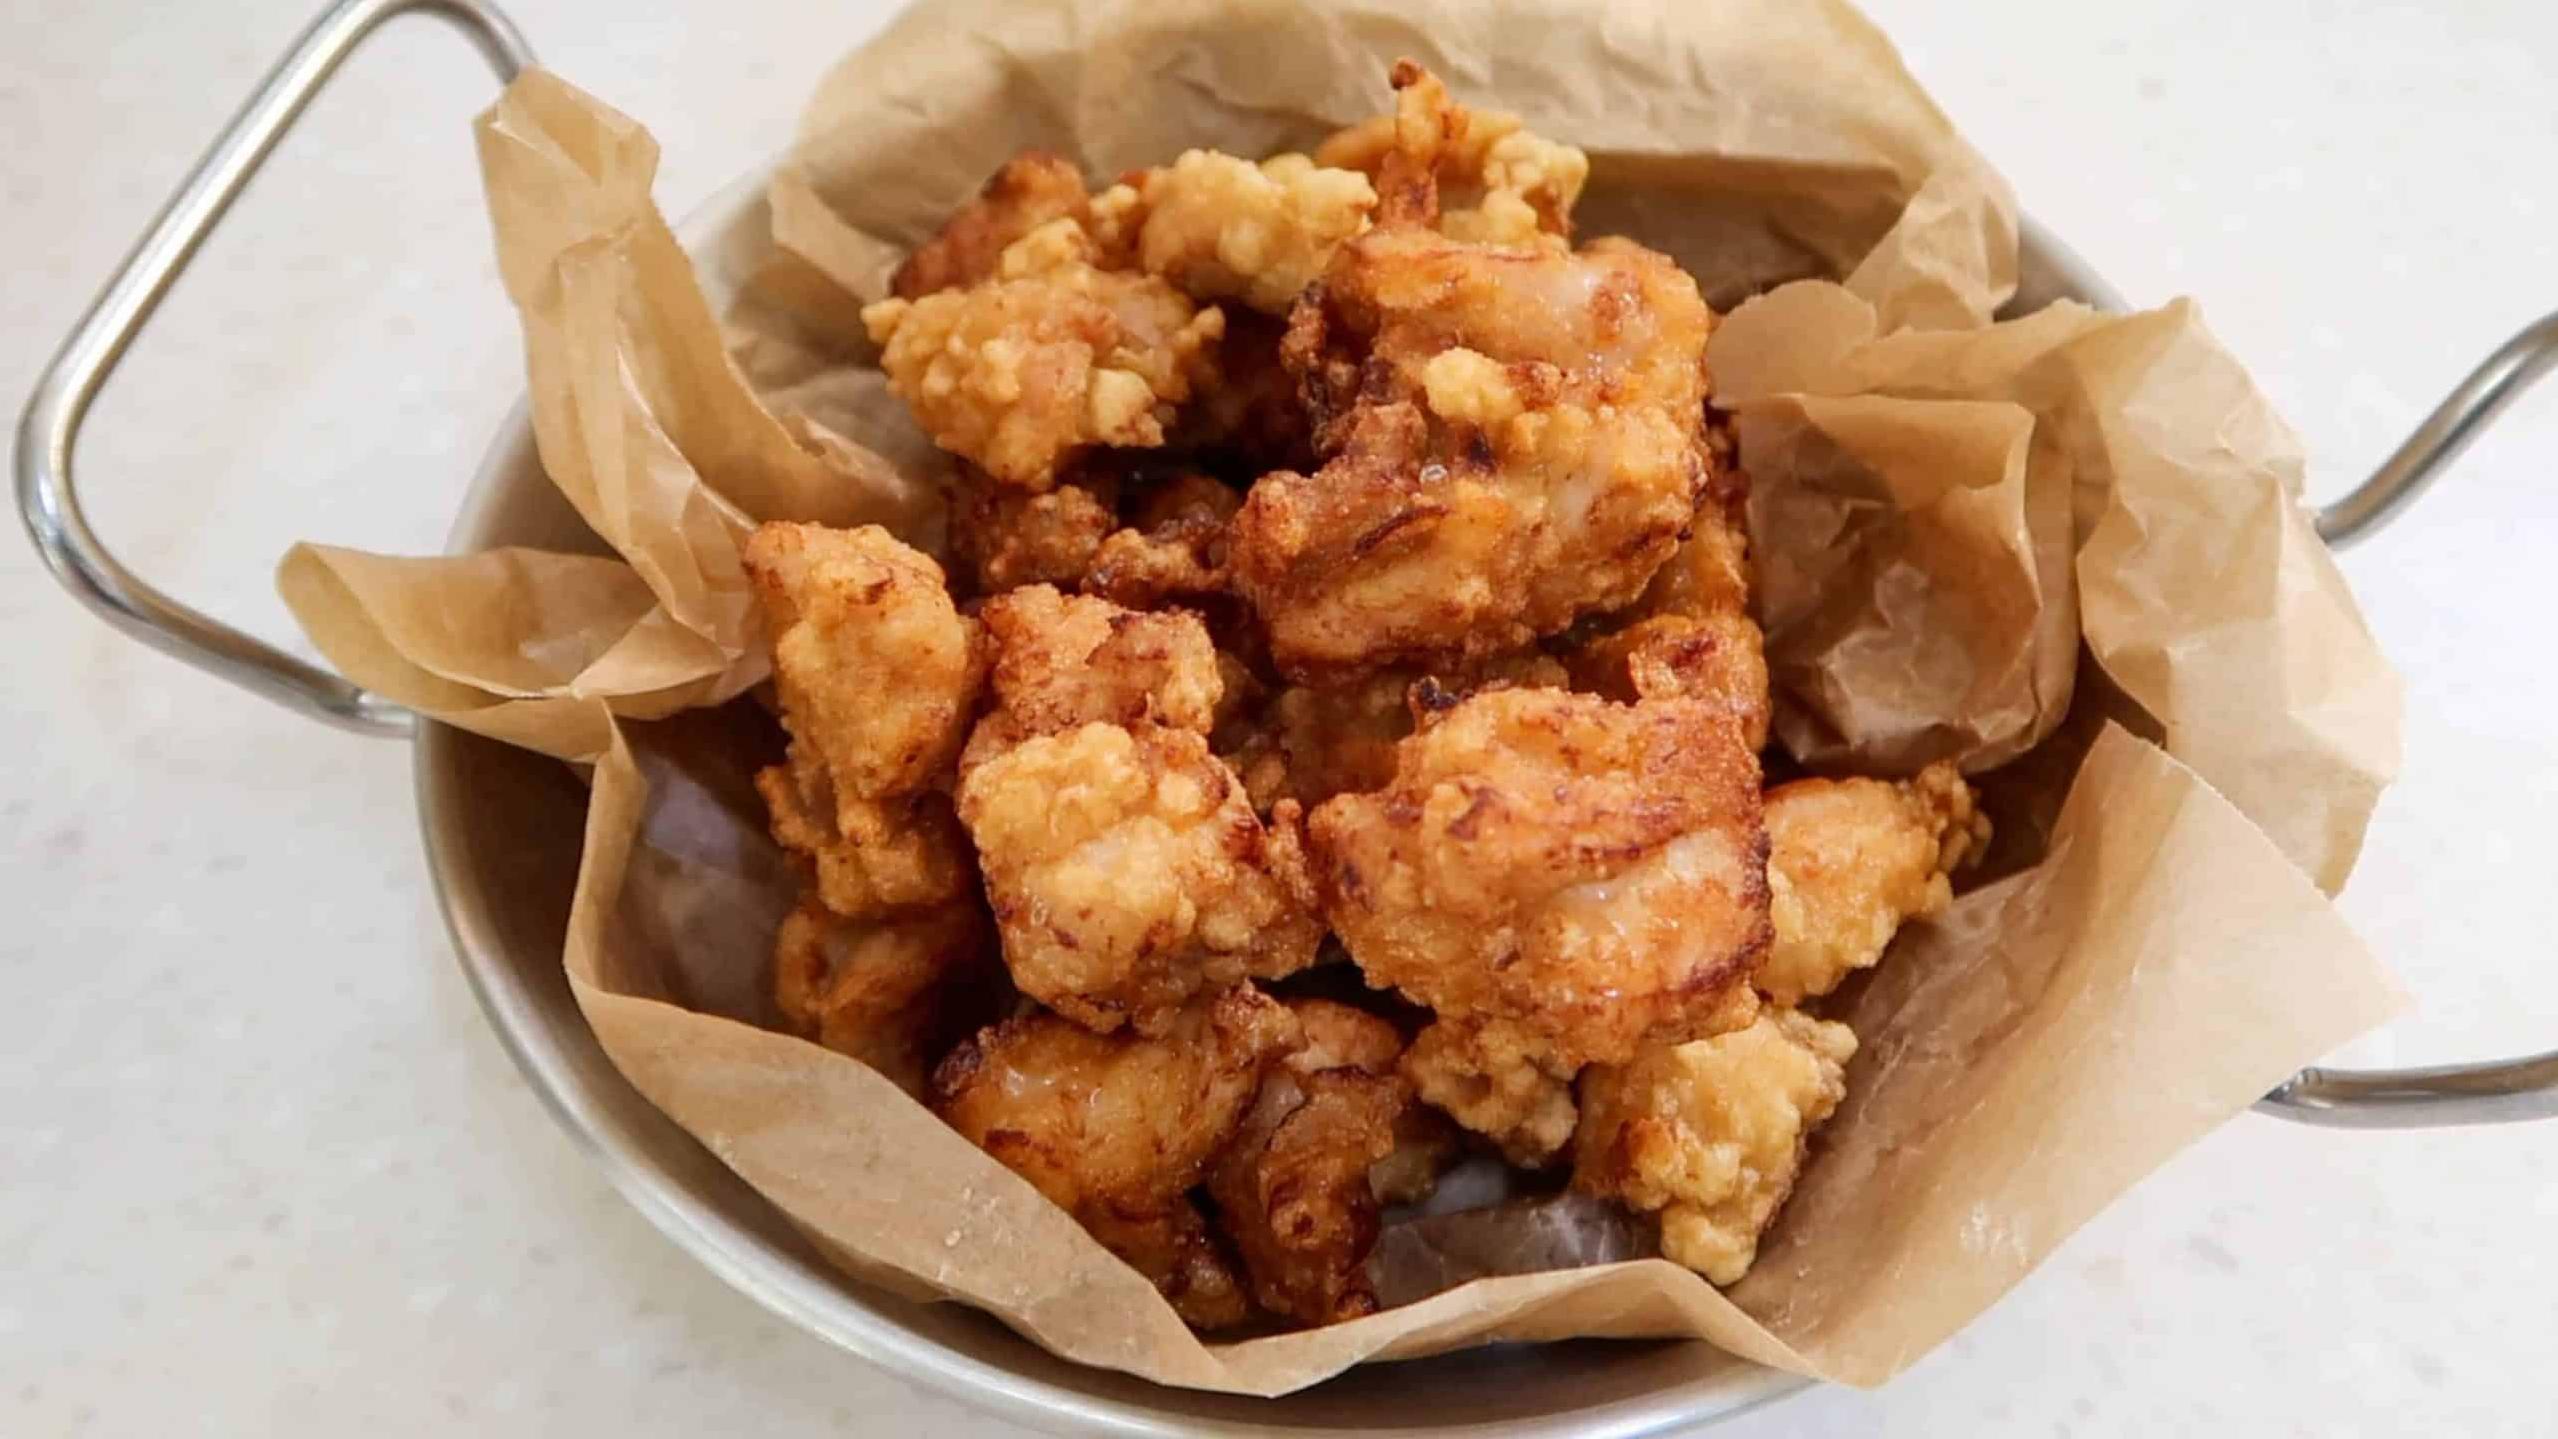  This is the perfect karaage for a Friday night dinner!